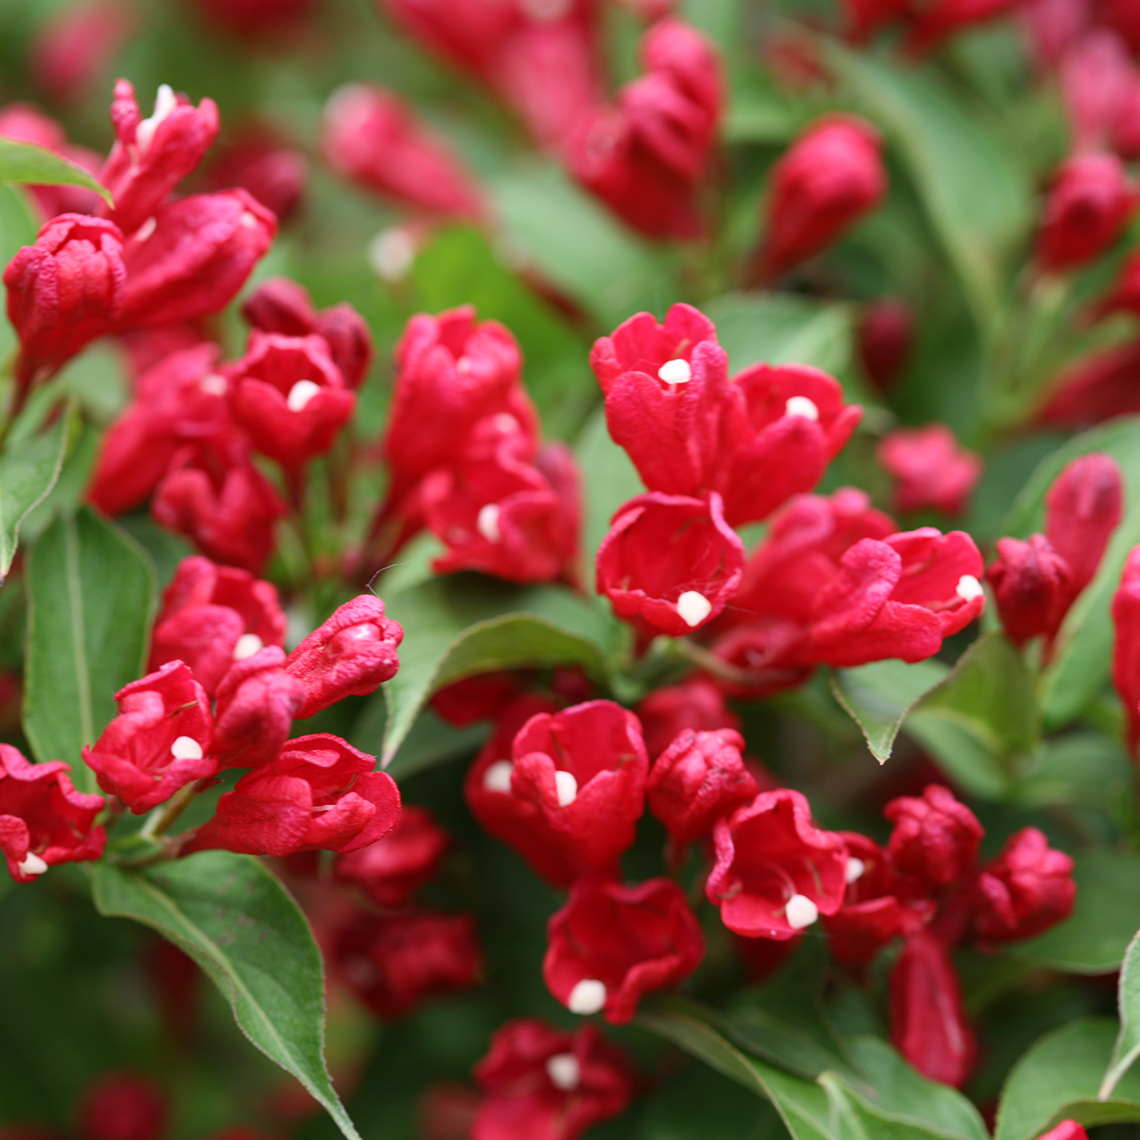 Closeup of the tubular red blooms of Sonic Bloom Red weigela